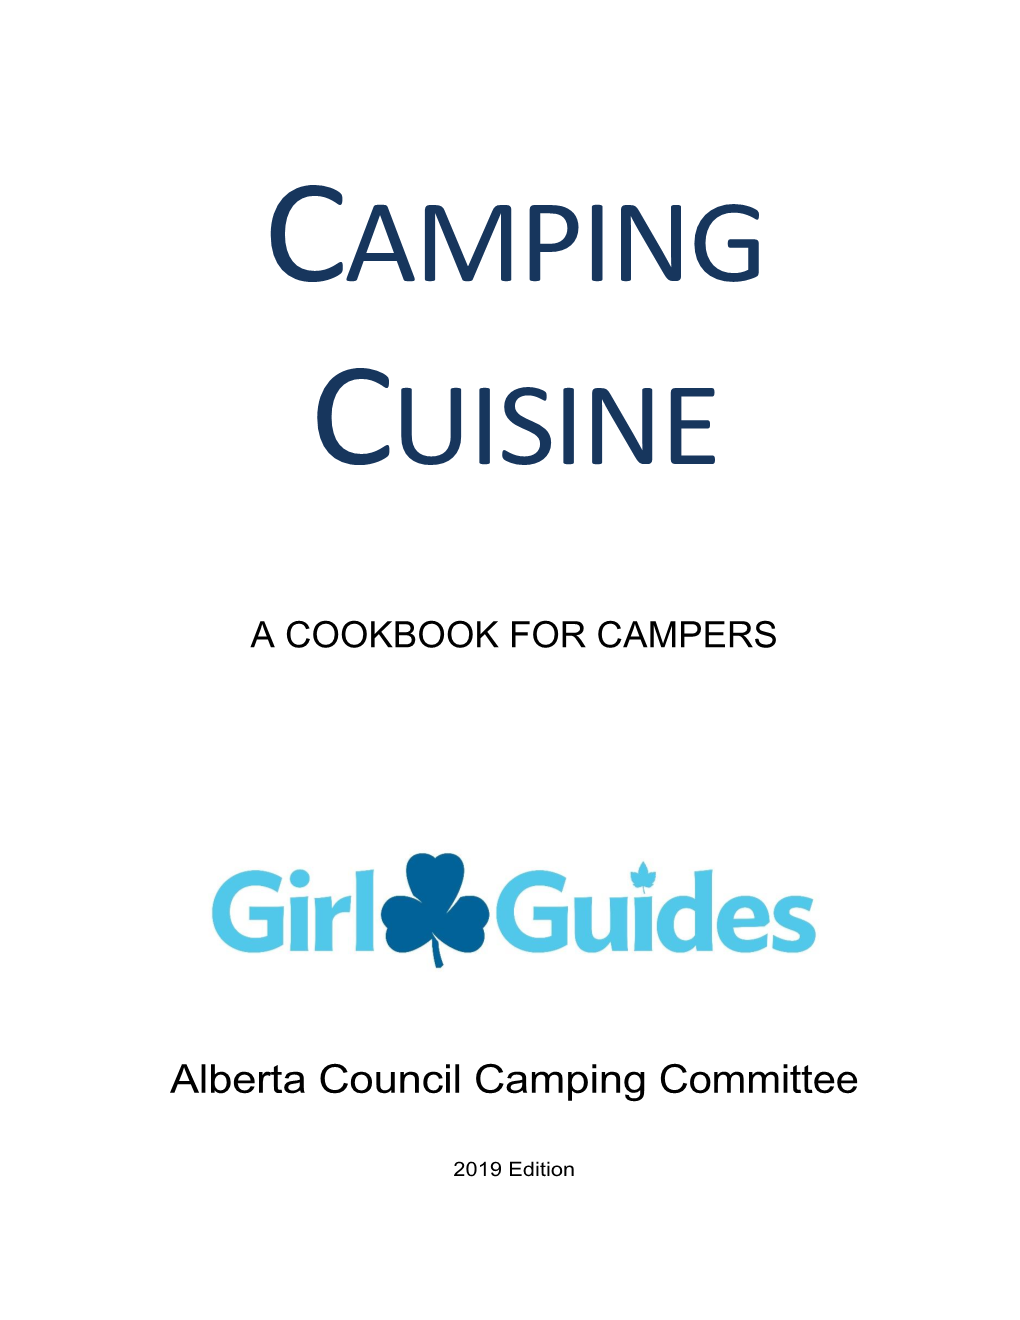 Alberta Council Camping Committee